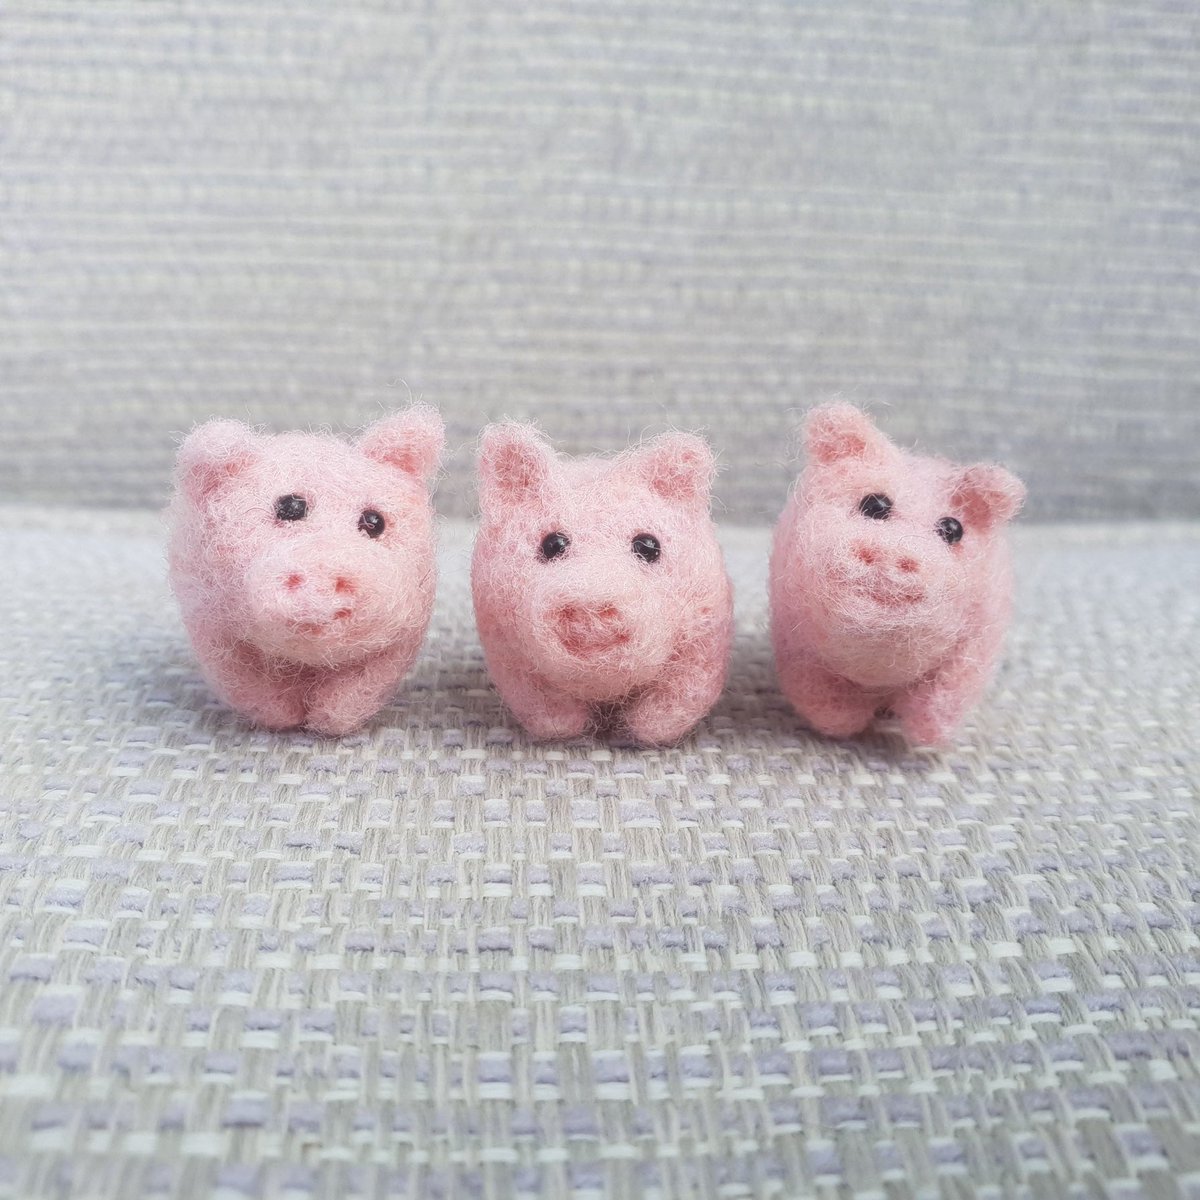 Hello!
I have three little Piggies available to adopt from my Etsy shop! Do you know someone who would absolutely love to receive one in the post? Will come gift wrapped.
Thank you 💝
etsy.com/listing/146053…
#etsy #pigs #ukgiftam #handmadehour #creativebizhour